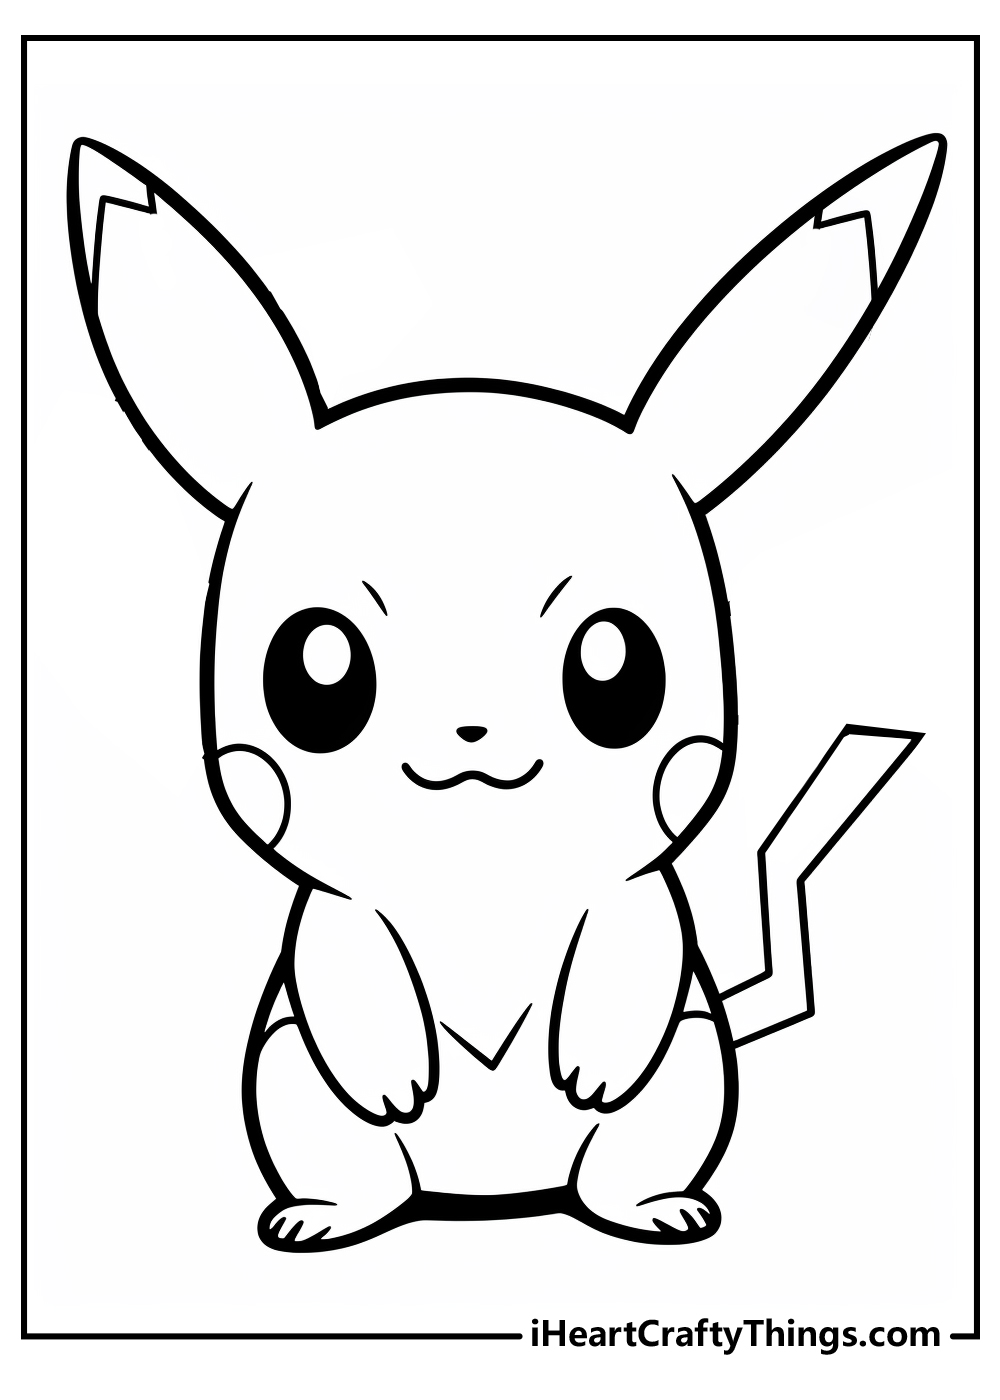 pikachu colouring page